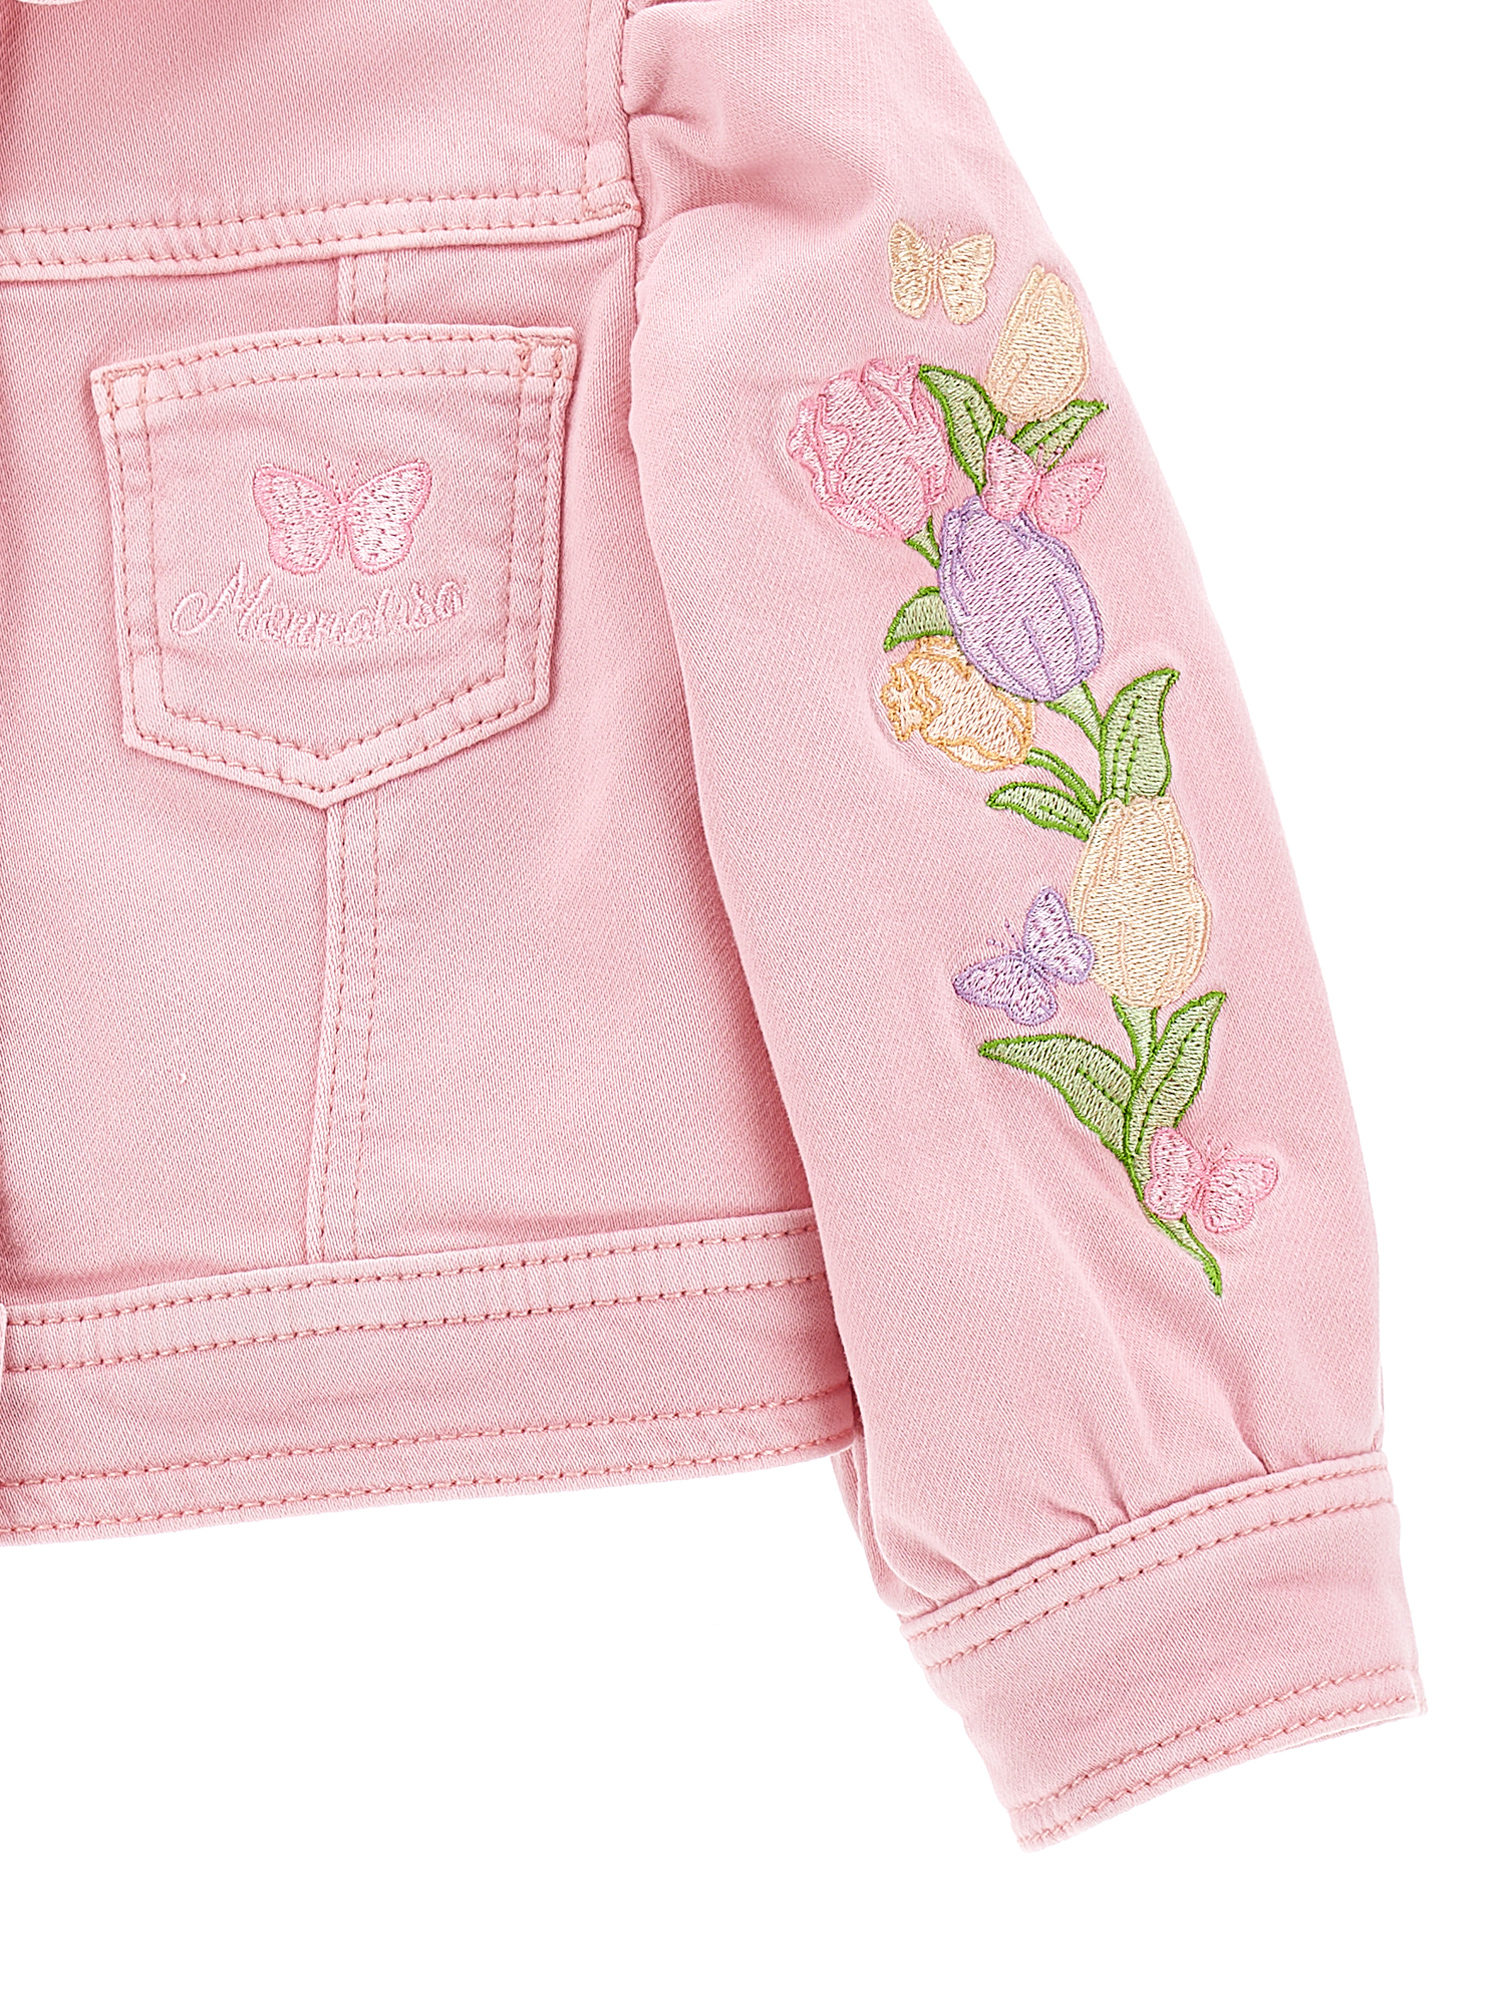 Shop Monnalisa Embroidered Denim Jacket In Rosa Fairy Tale